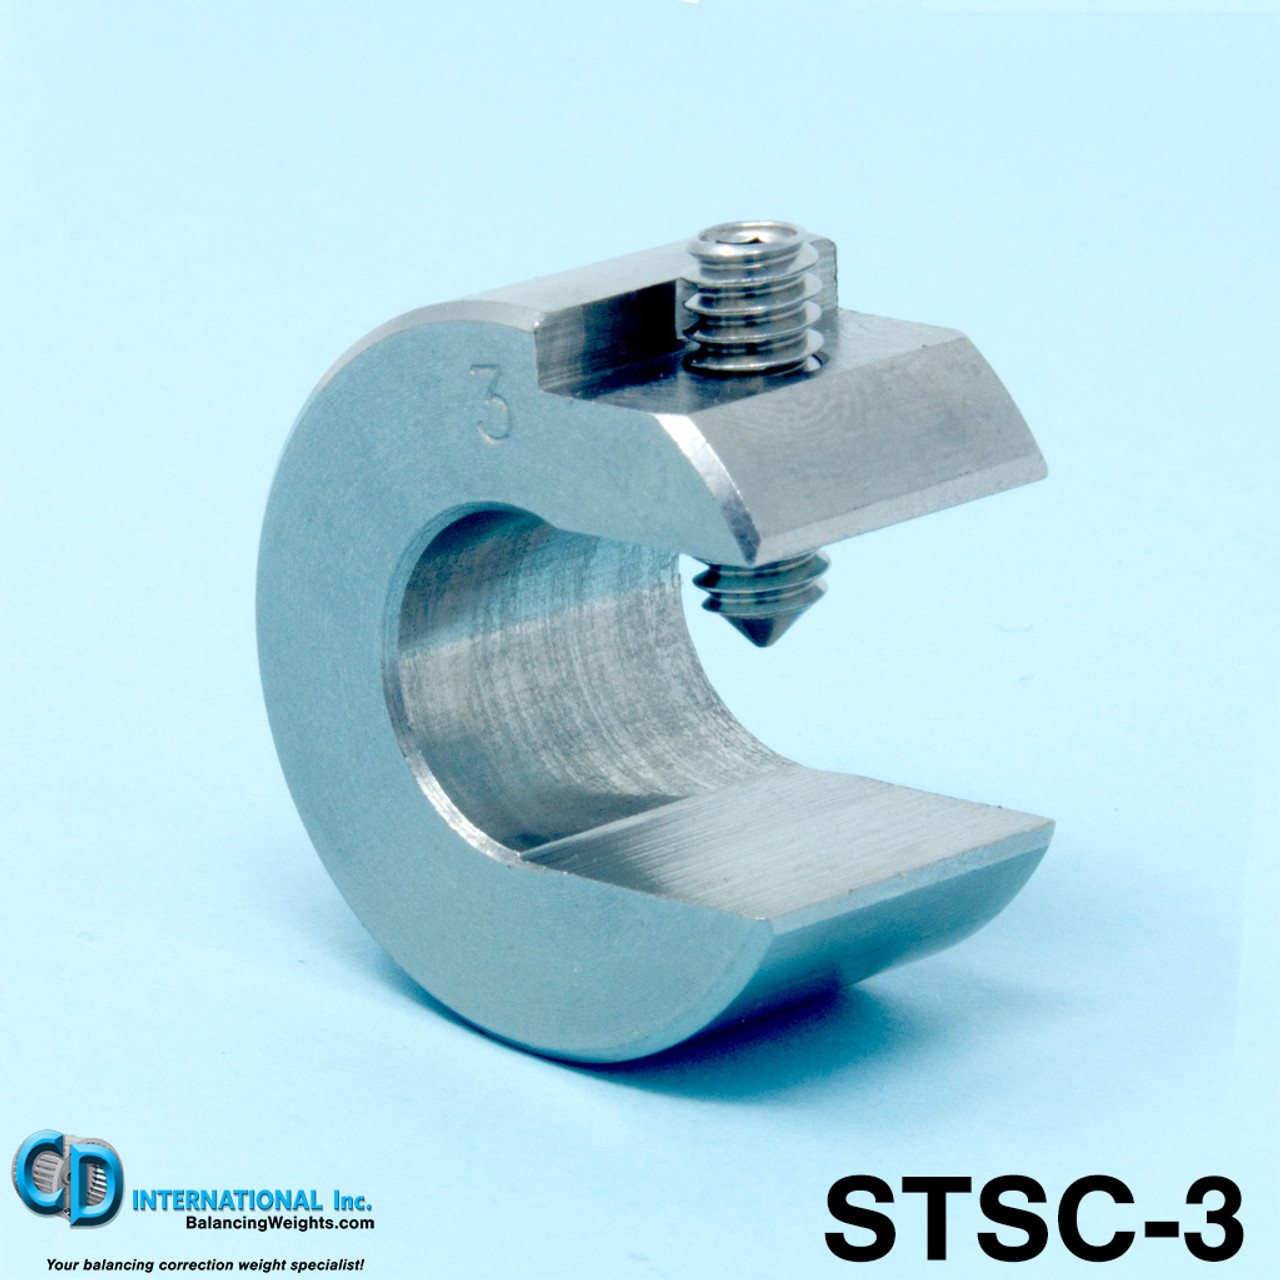 3 oz (84g) Stainless Steel Balancing Clamp, 5/8" throat size